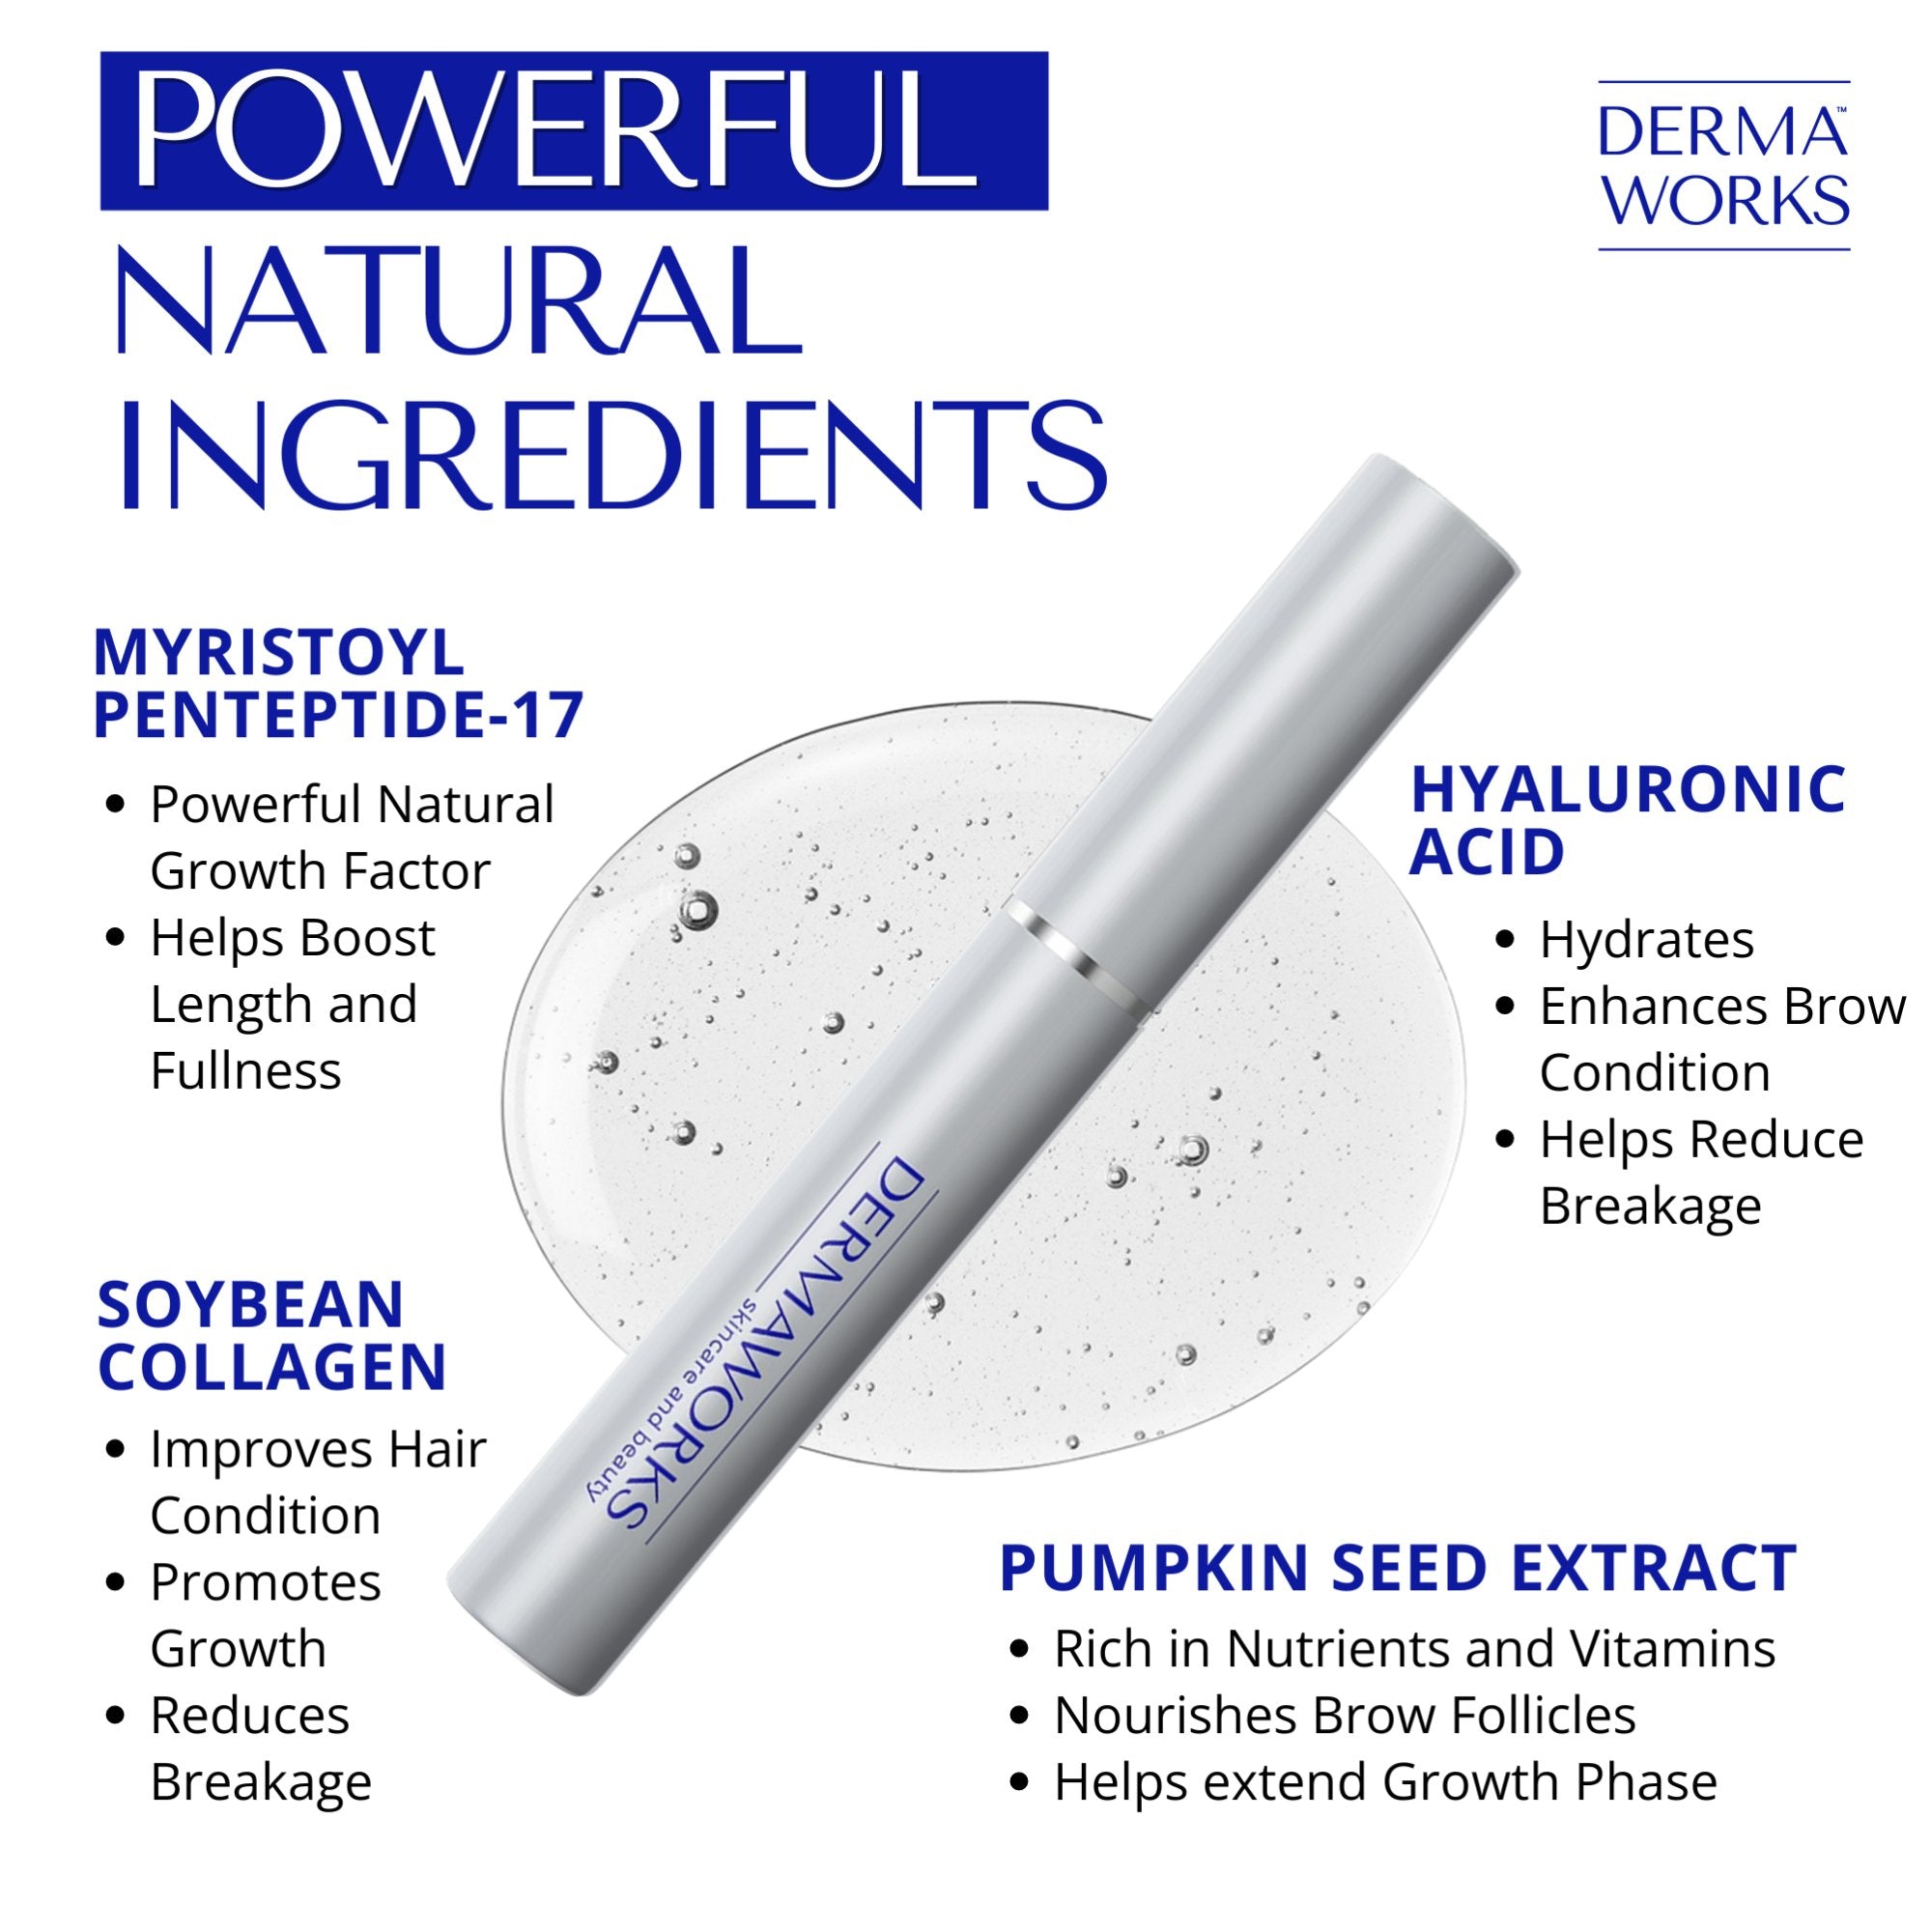 Dermaworks rapid brow serum boasts a powerful peptide growth factor, soybean collagen, pumpkin seed extract and hyaluronic acid.